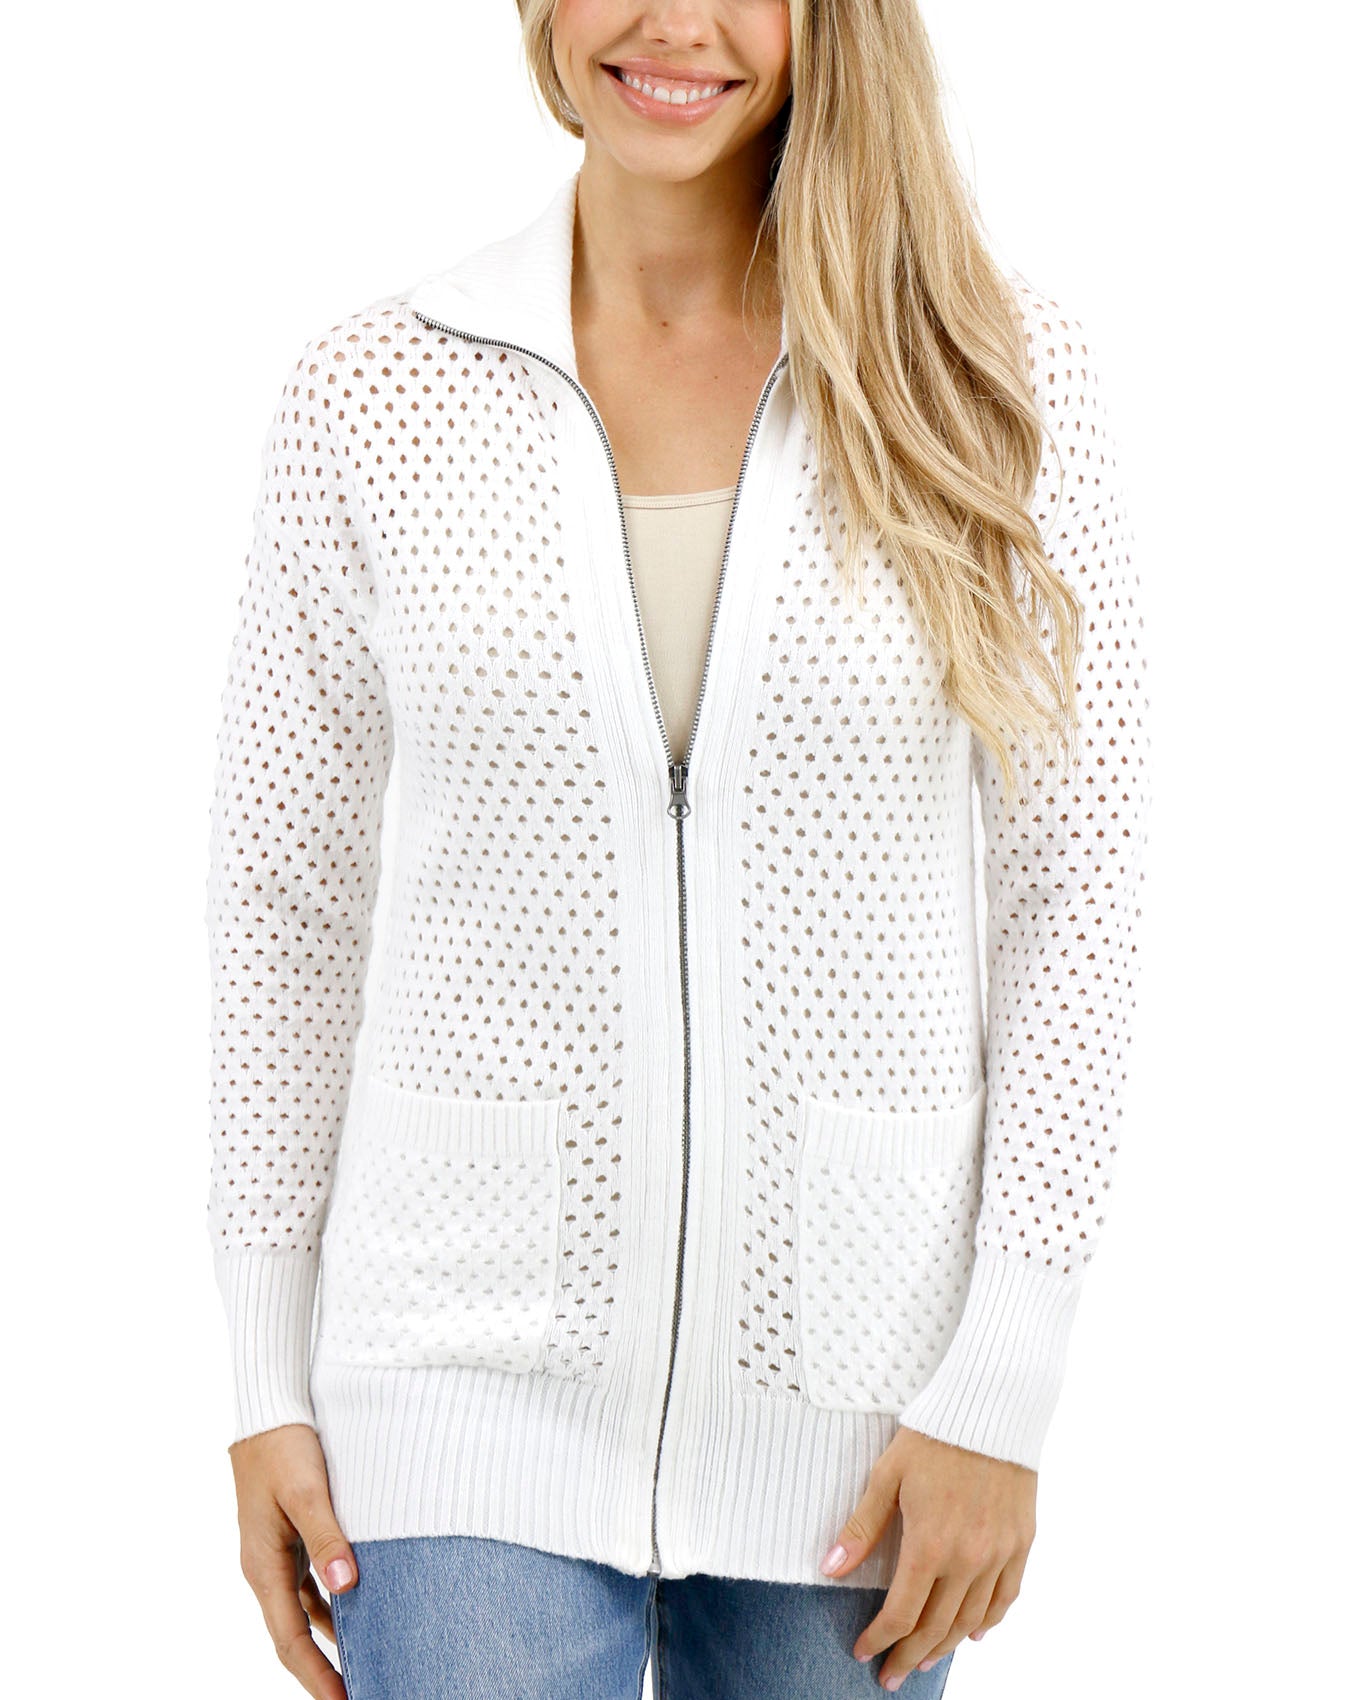 Zipped front stock shot of White Open Knit Zippered Cardigan